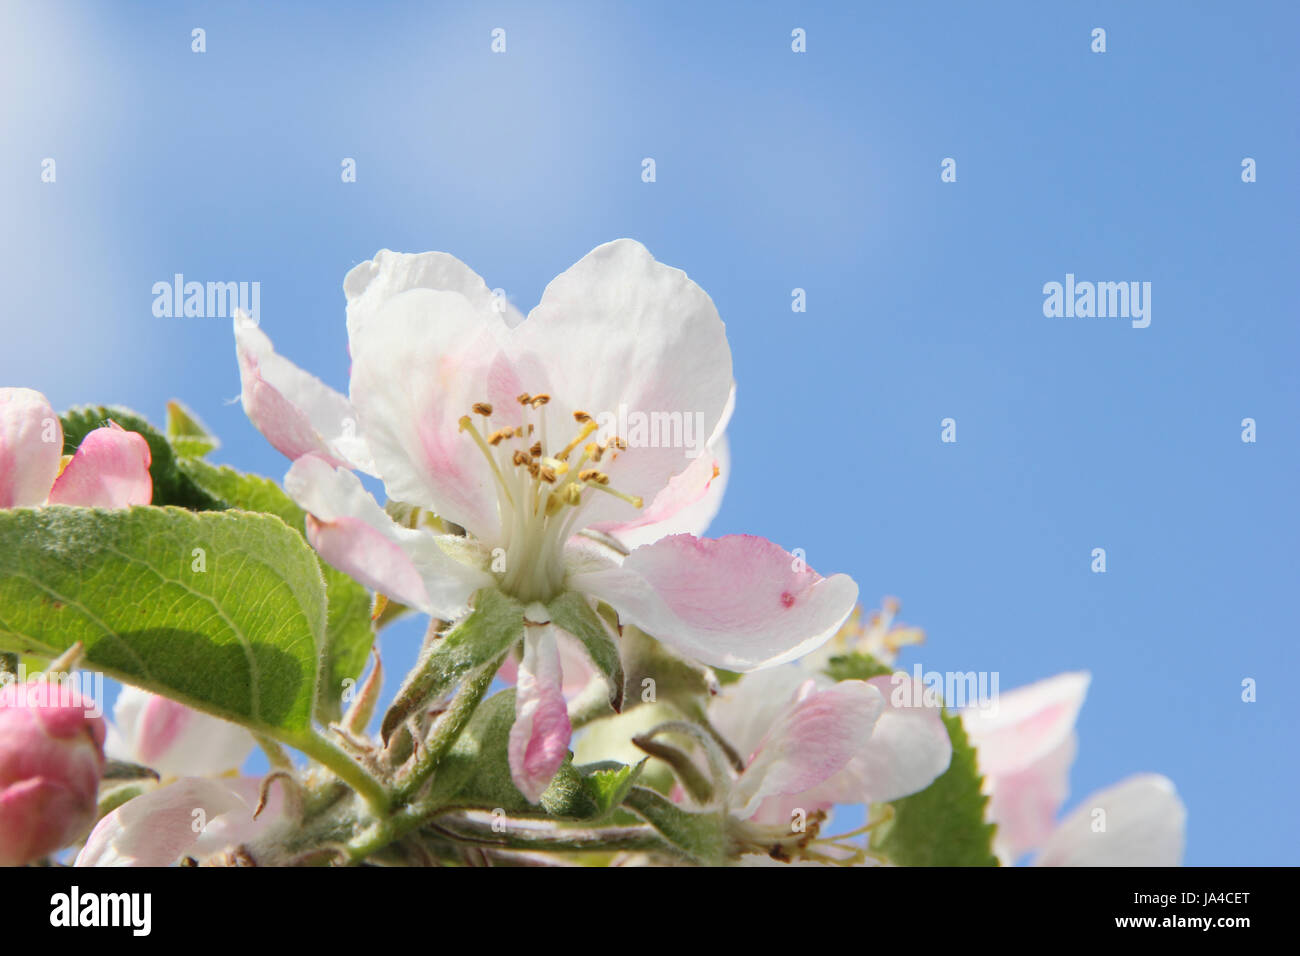 Malus domestica 'Yorkshire Aromatic' heritage apple variety in full bloom in an English orchard on a sunny May day, England UK Stock Photo